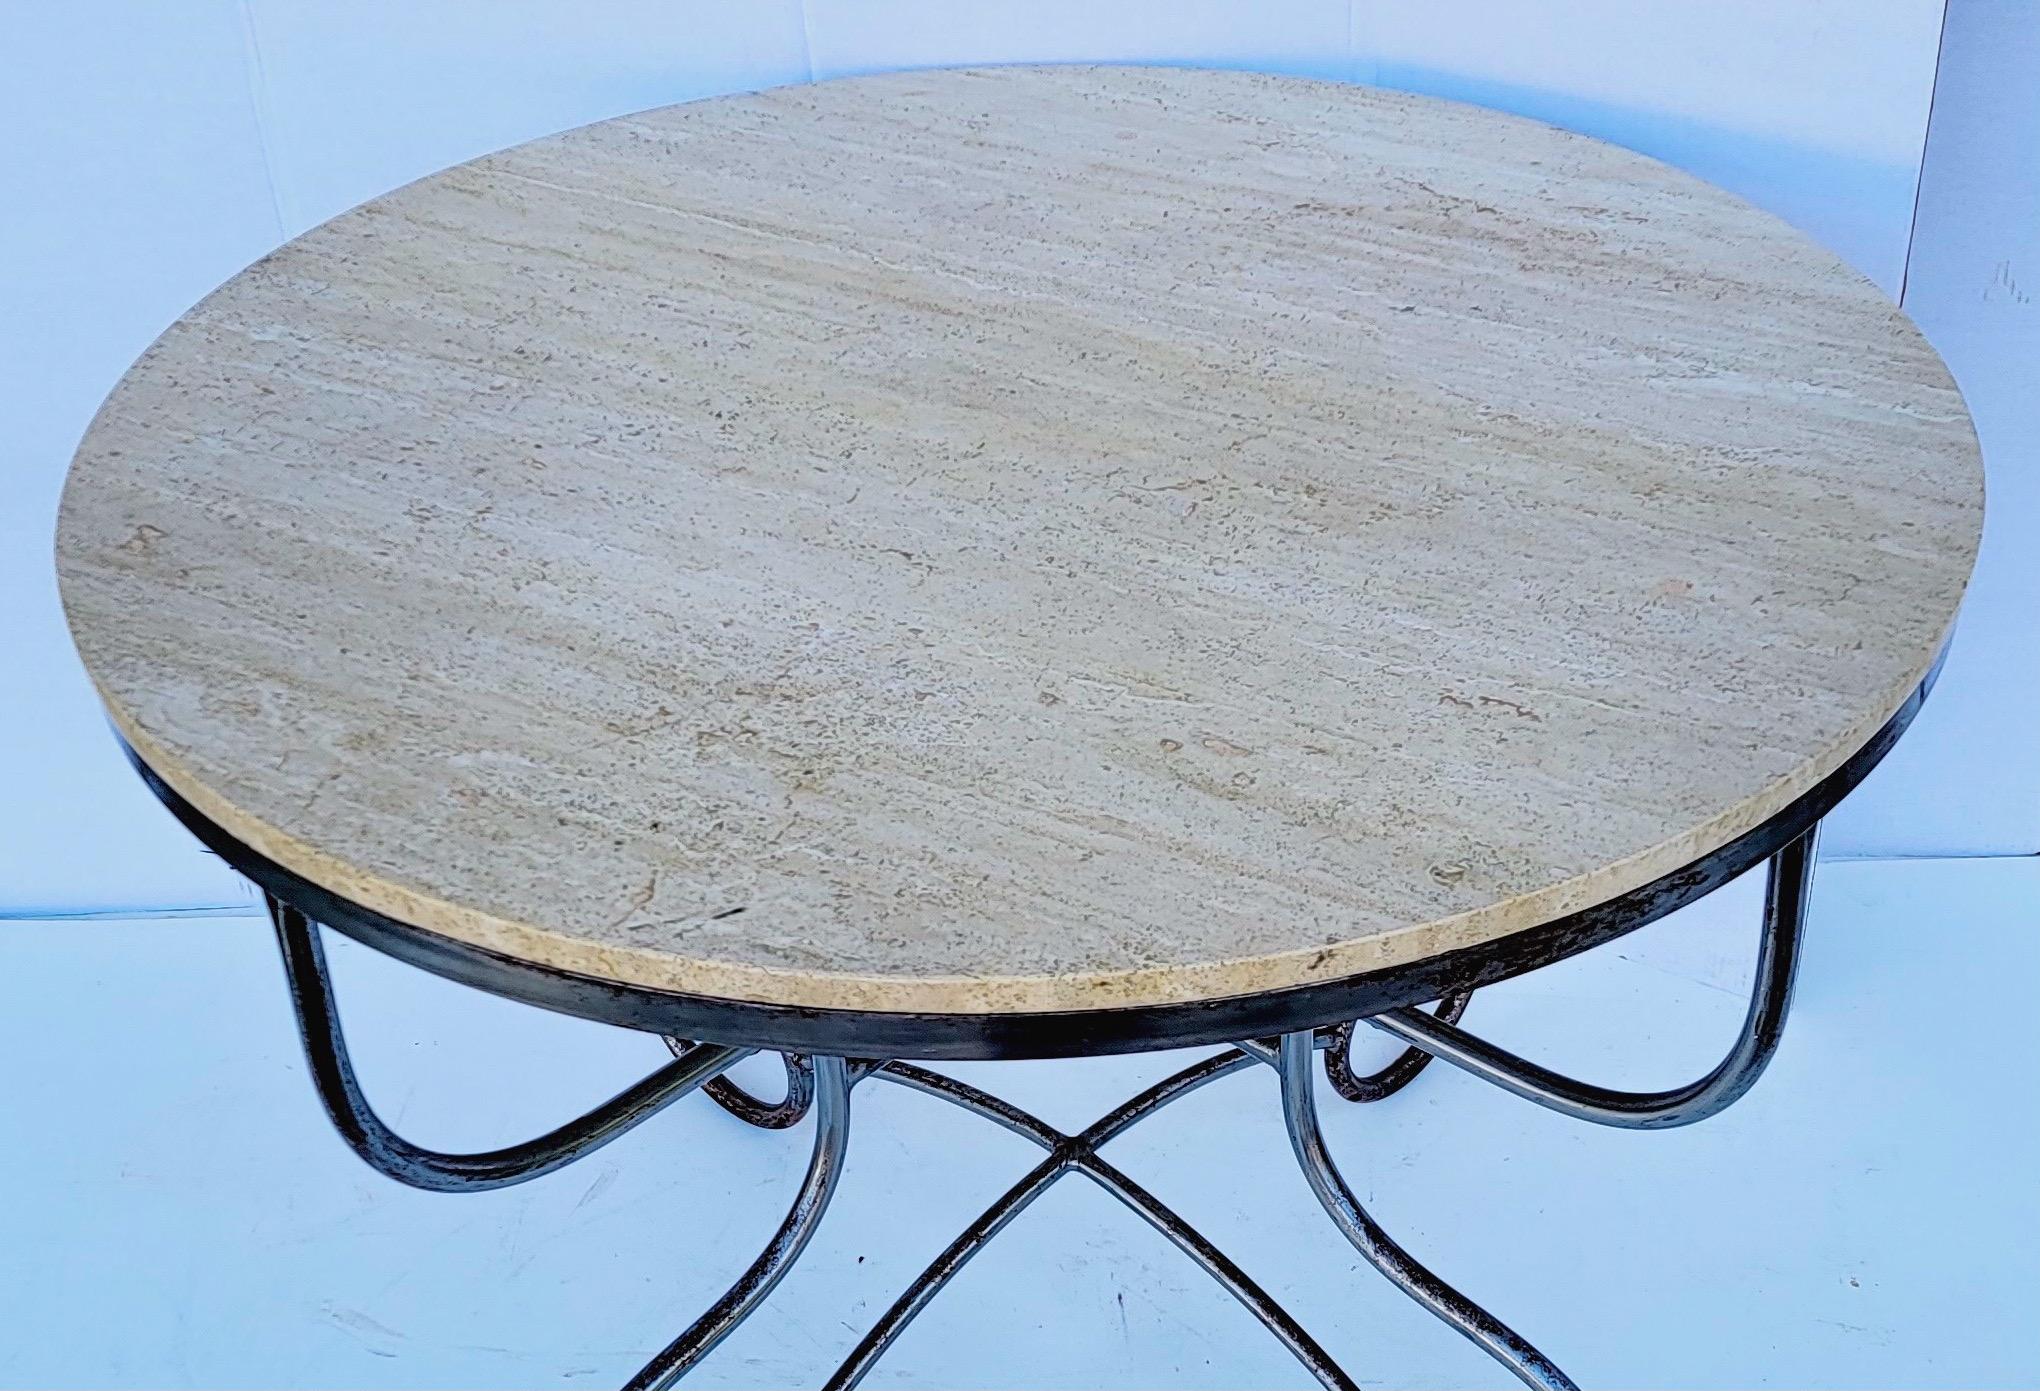 This is a French neo-classical style steel, brass and stone center or dining table. It’s clean lined make it a very versatile piece. It could be used as a small dining or center table. The frame is steel and brass, with a removable stone top. It is